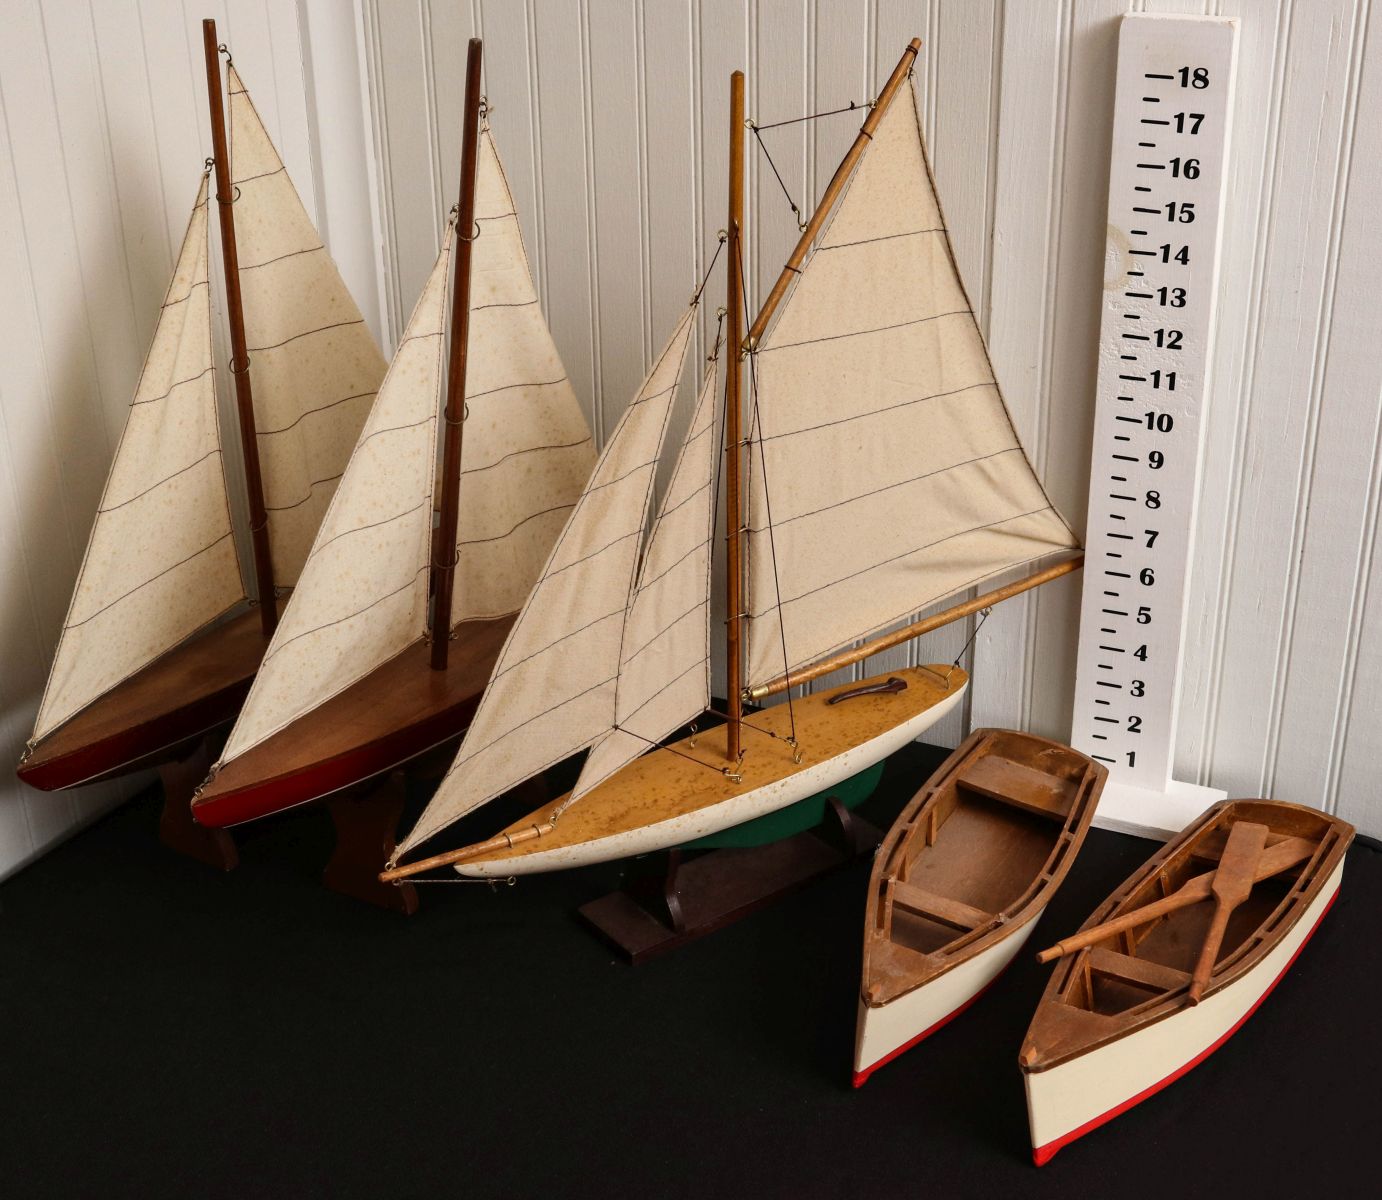 THREE MODERN WOOD HULL POND BOATS WITH SAILS